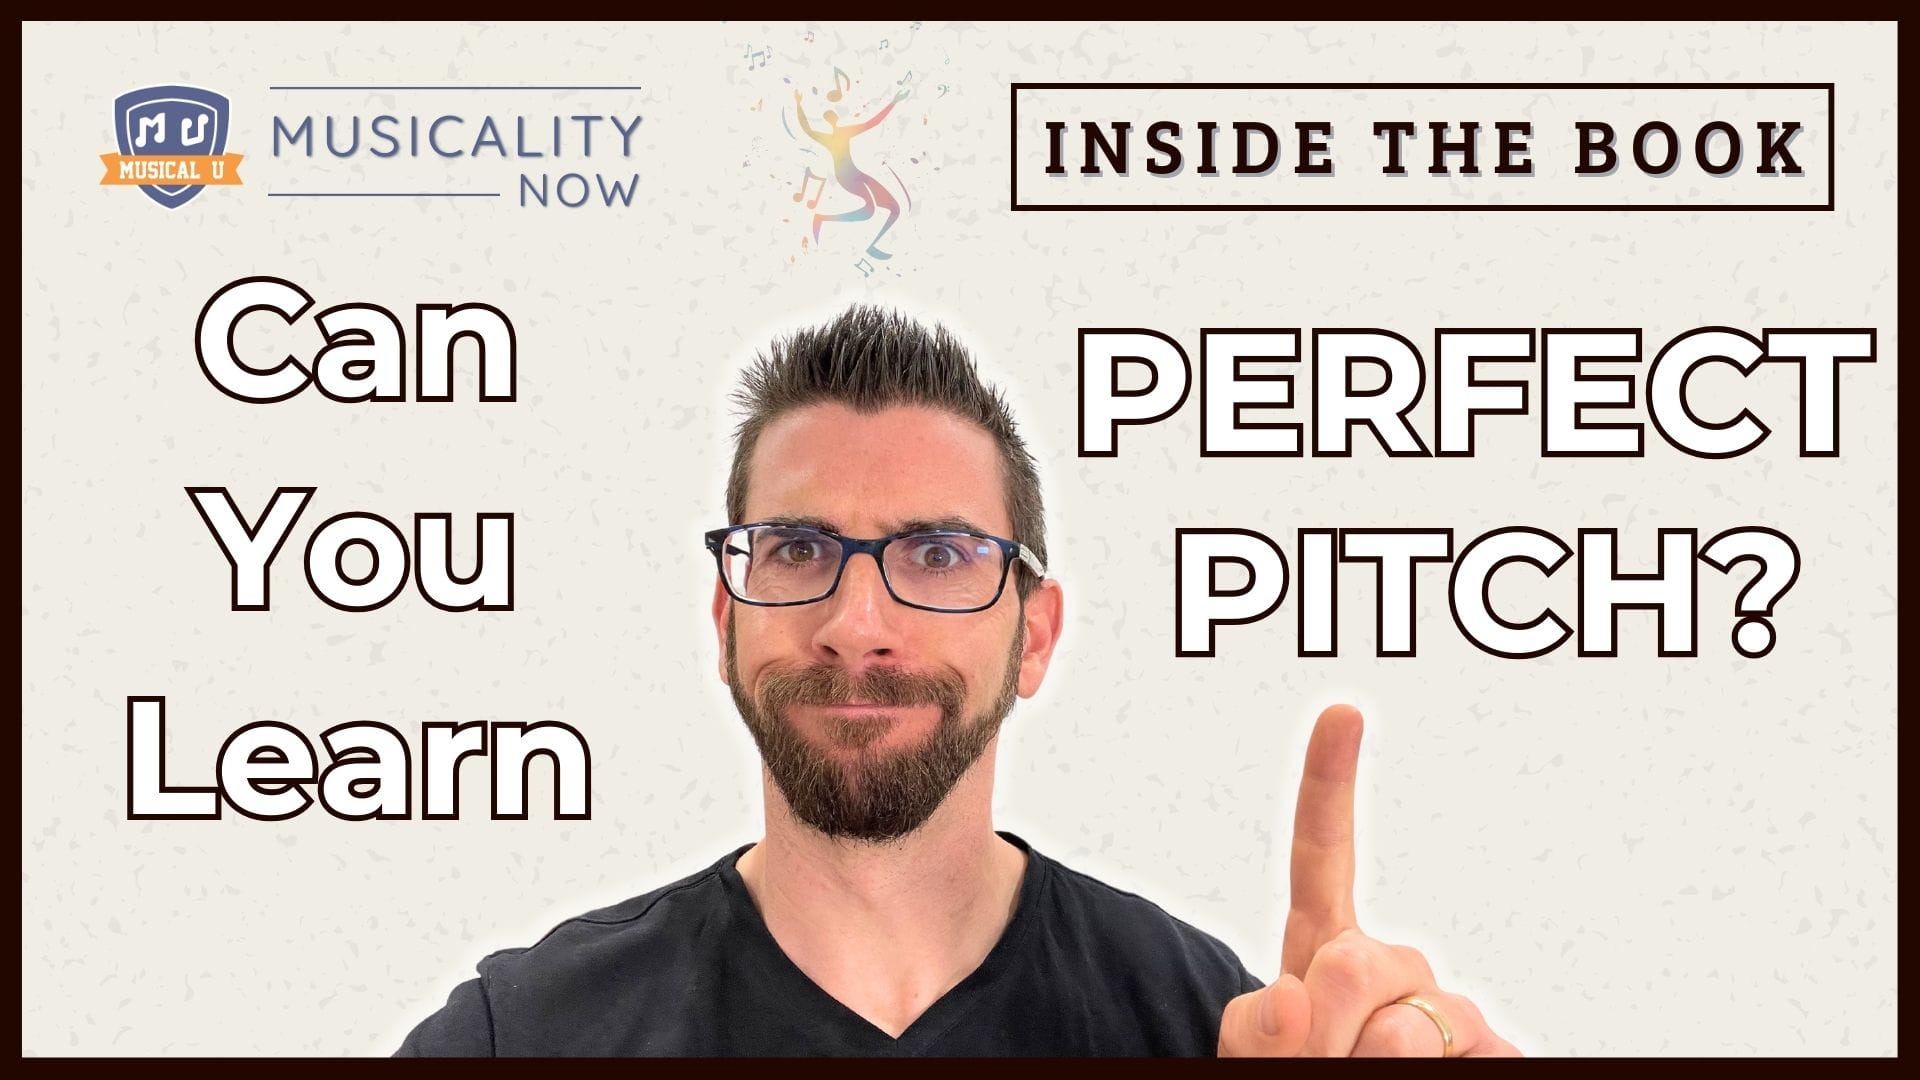 Can You Learn Perfect Pitch? Should You? (Inside The Book)